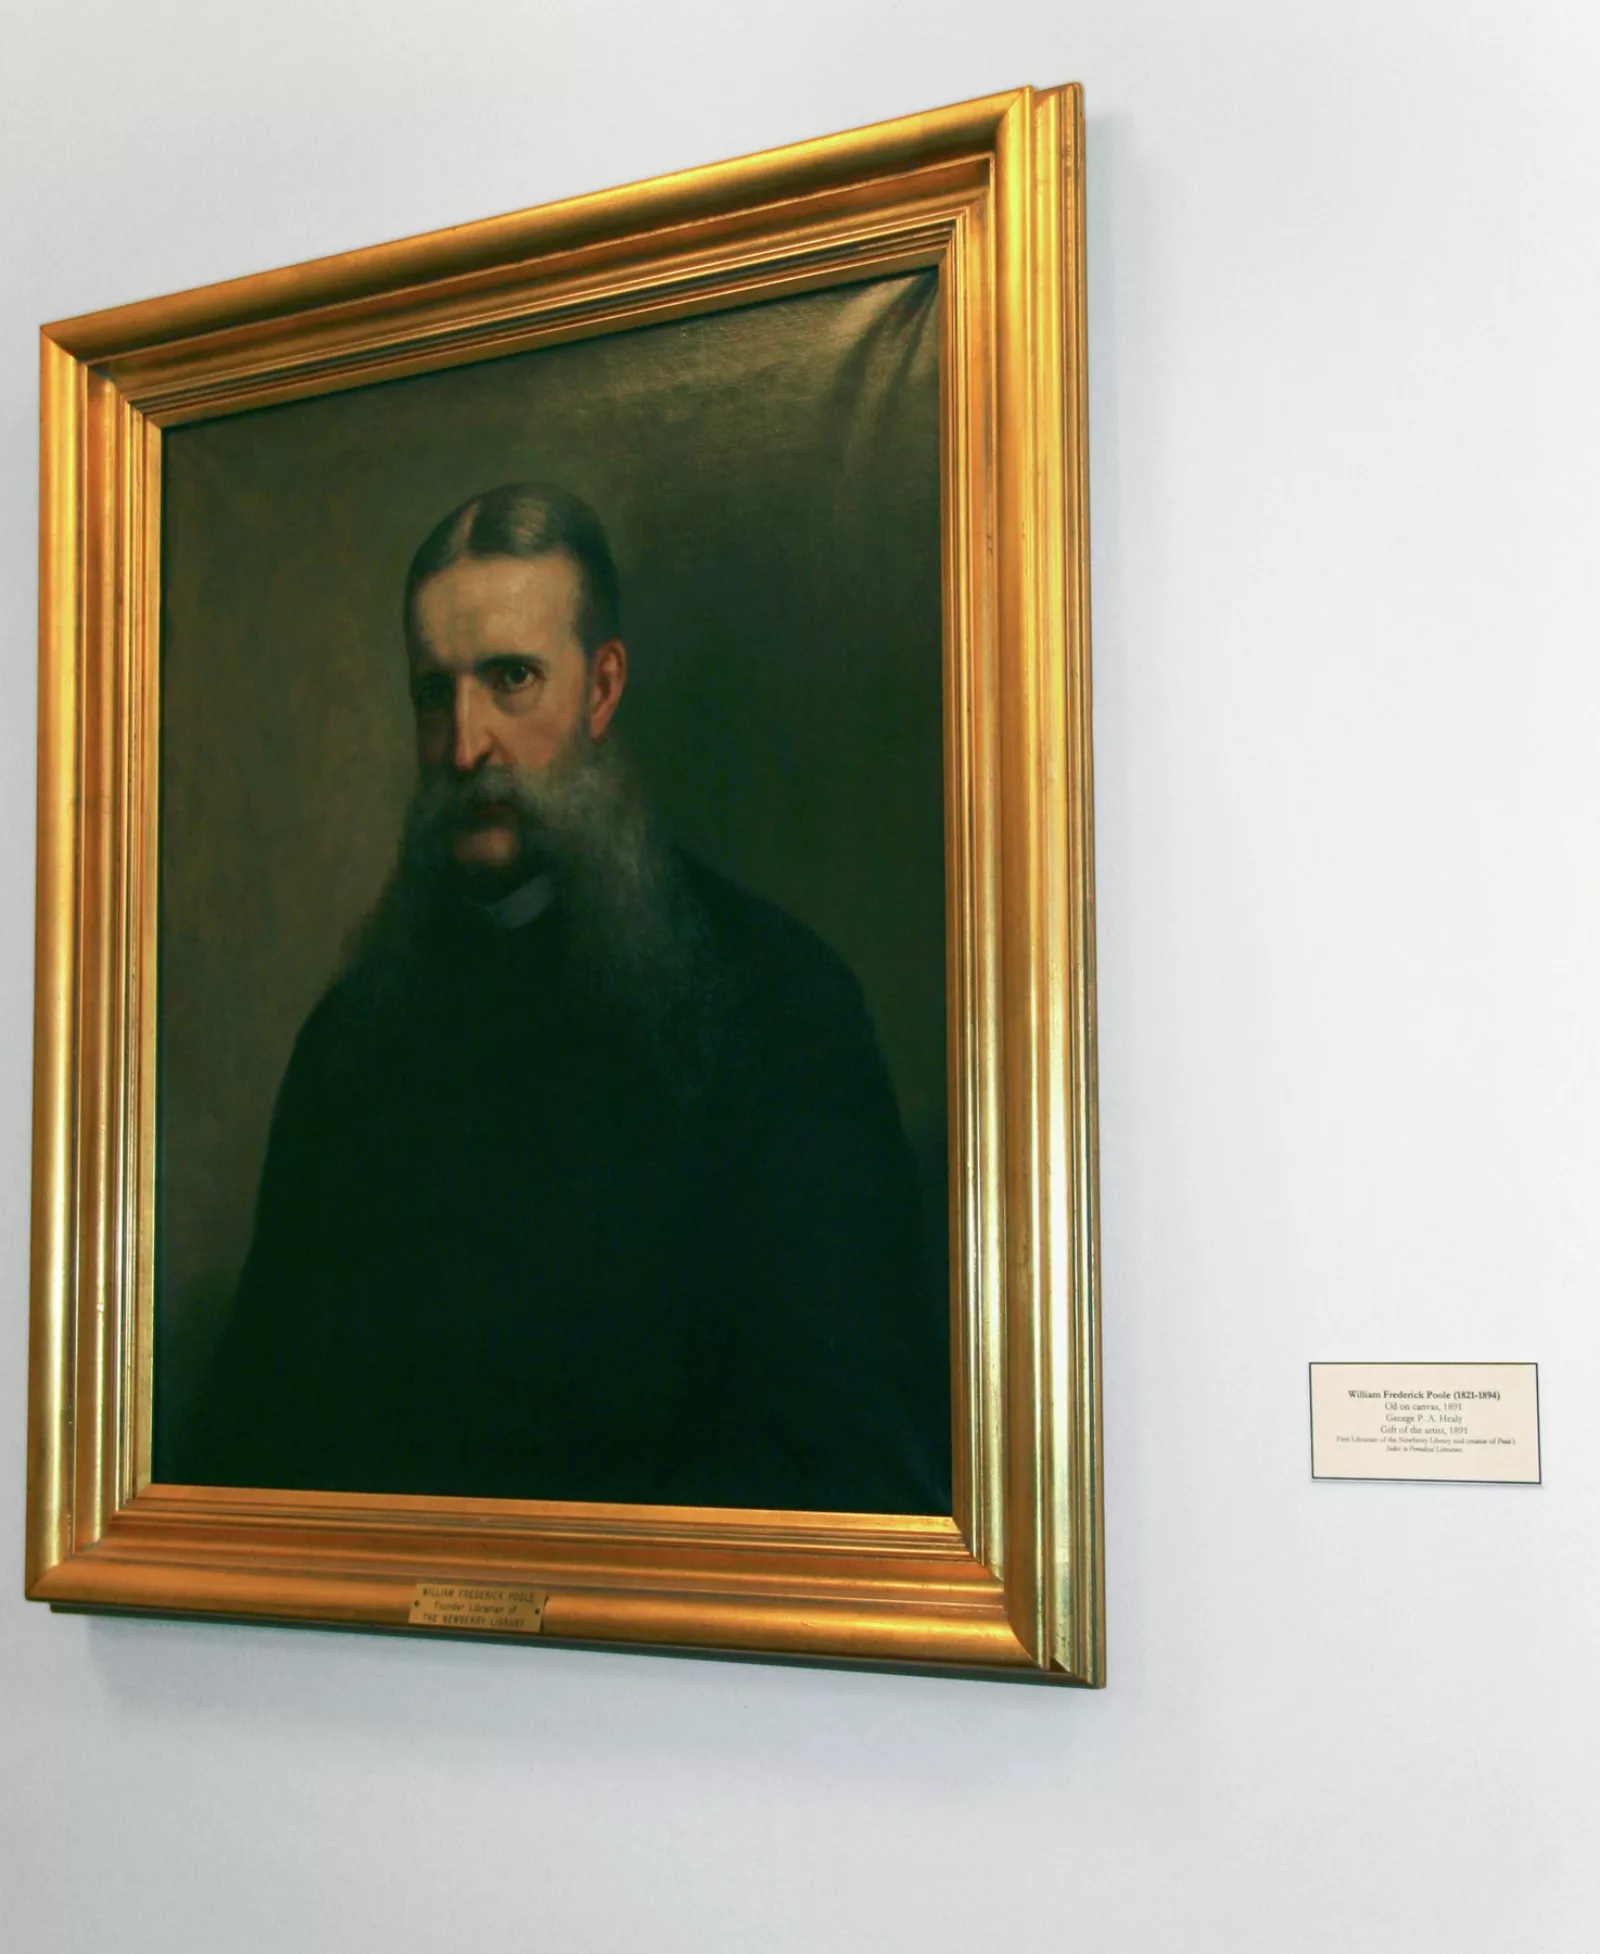 A portrait of Poole by George P. Healy hangs in the Newberry's General Reading Room in a gold frame.